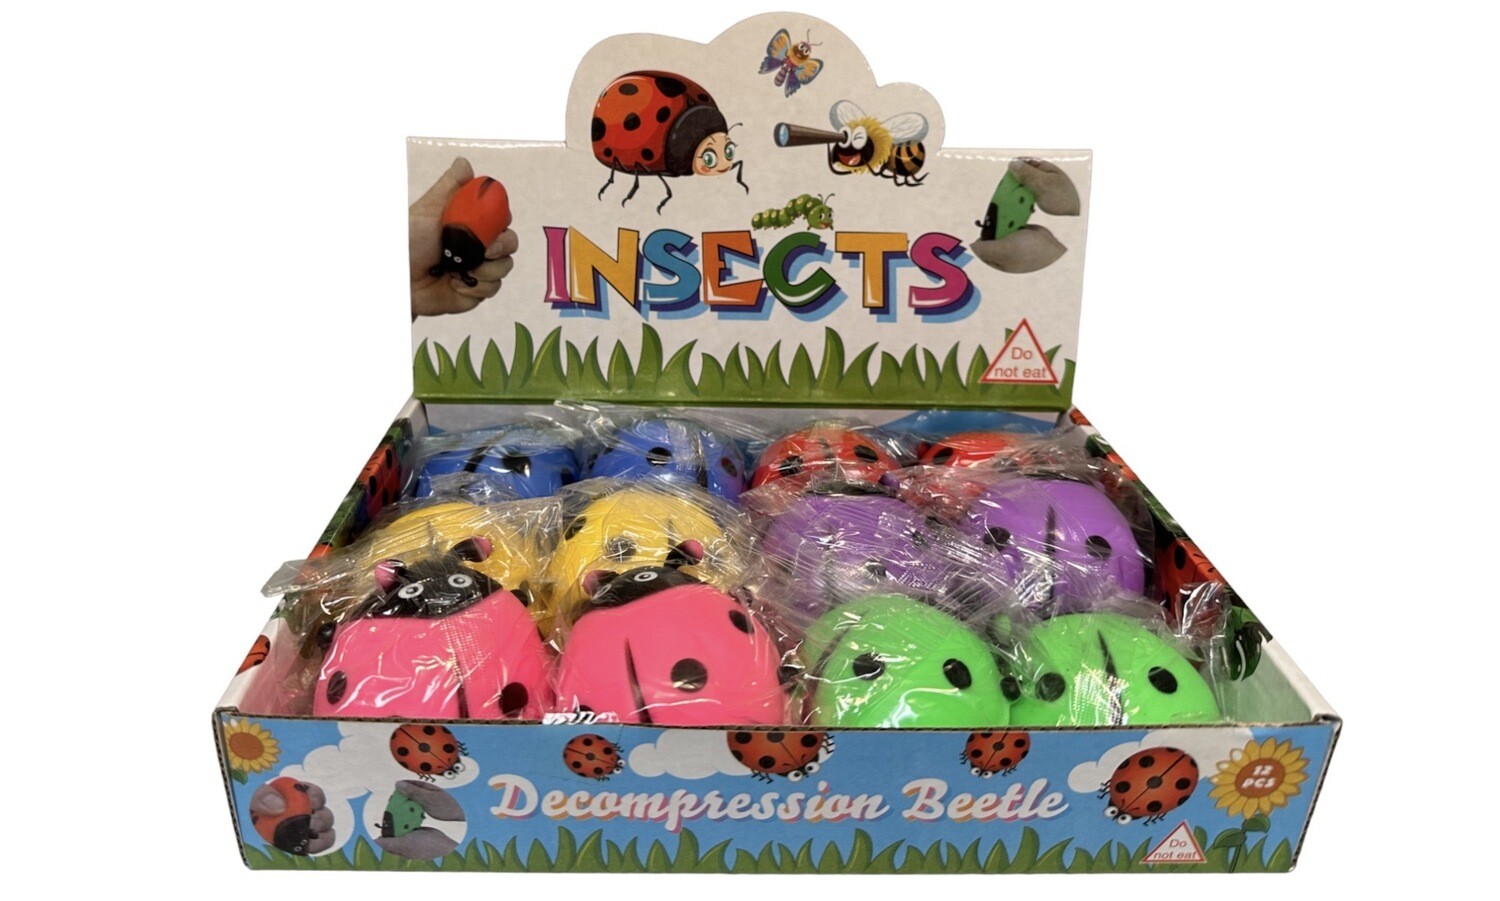 $1.99 NOVELTY MIX / INSECT SQUISH TOY / P-7001 - B-16